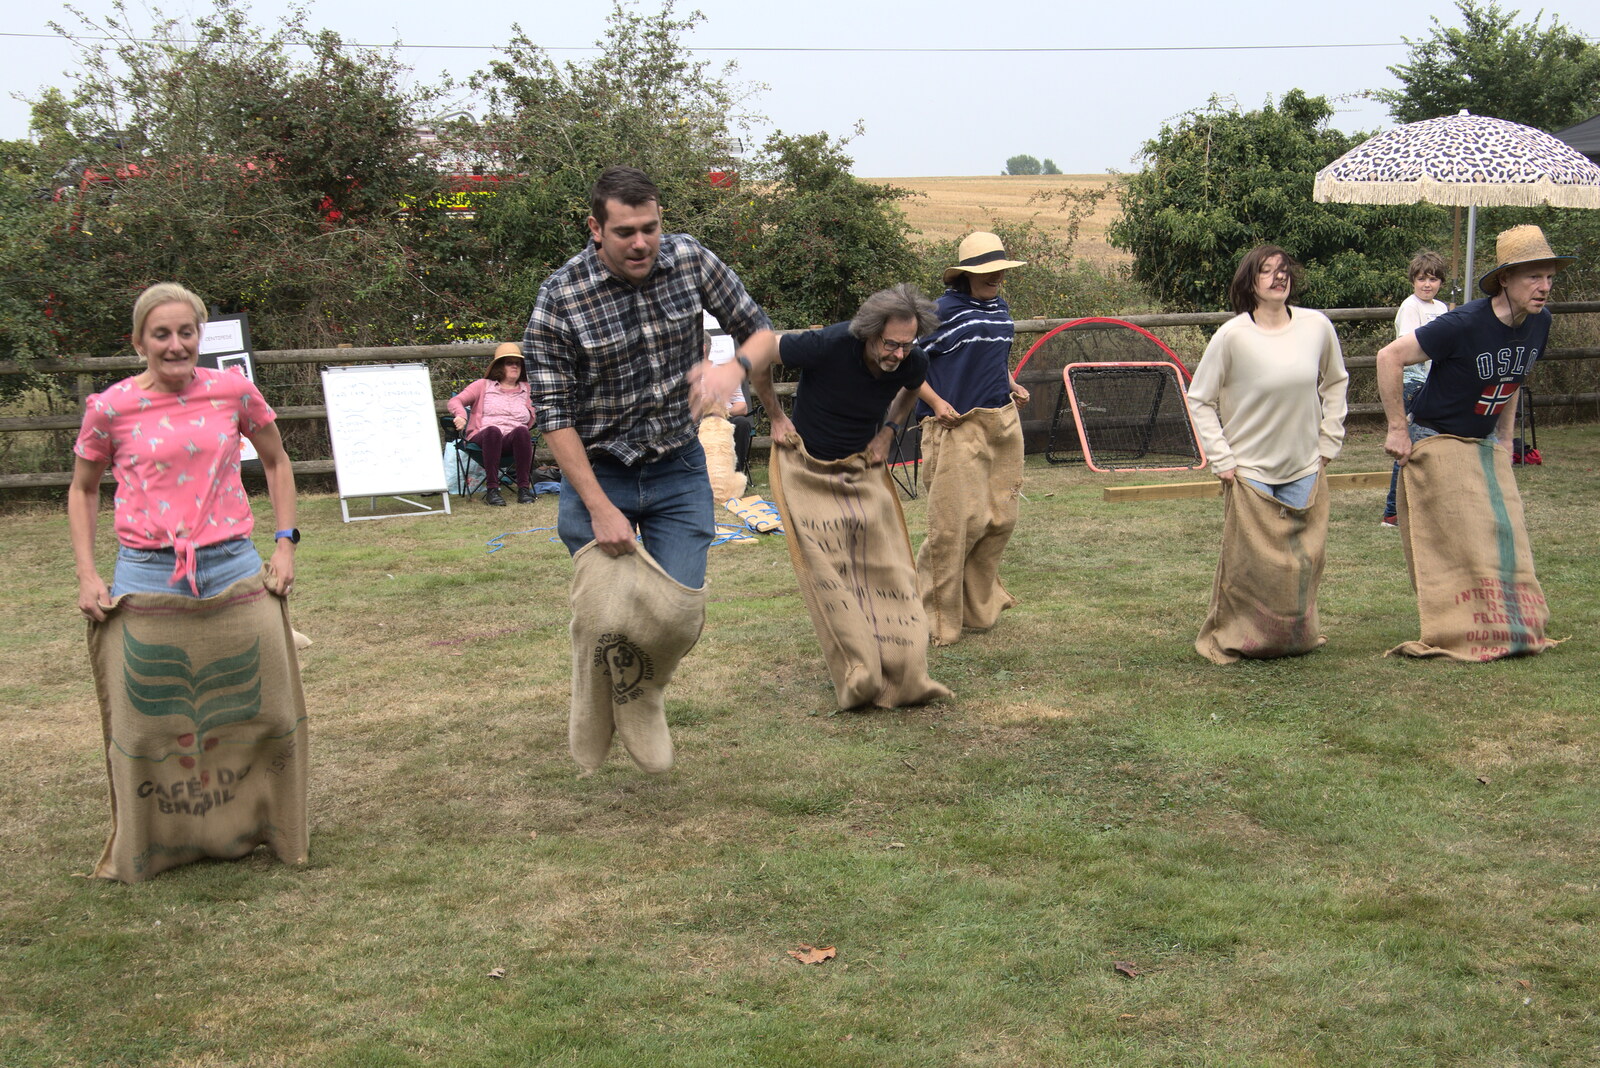 The adults' sack race occurs from The Brome and Oakley Fête, Oakley Hall, Suffolk - 19th September 2021